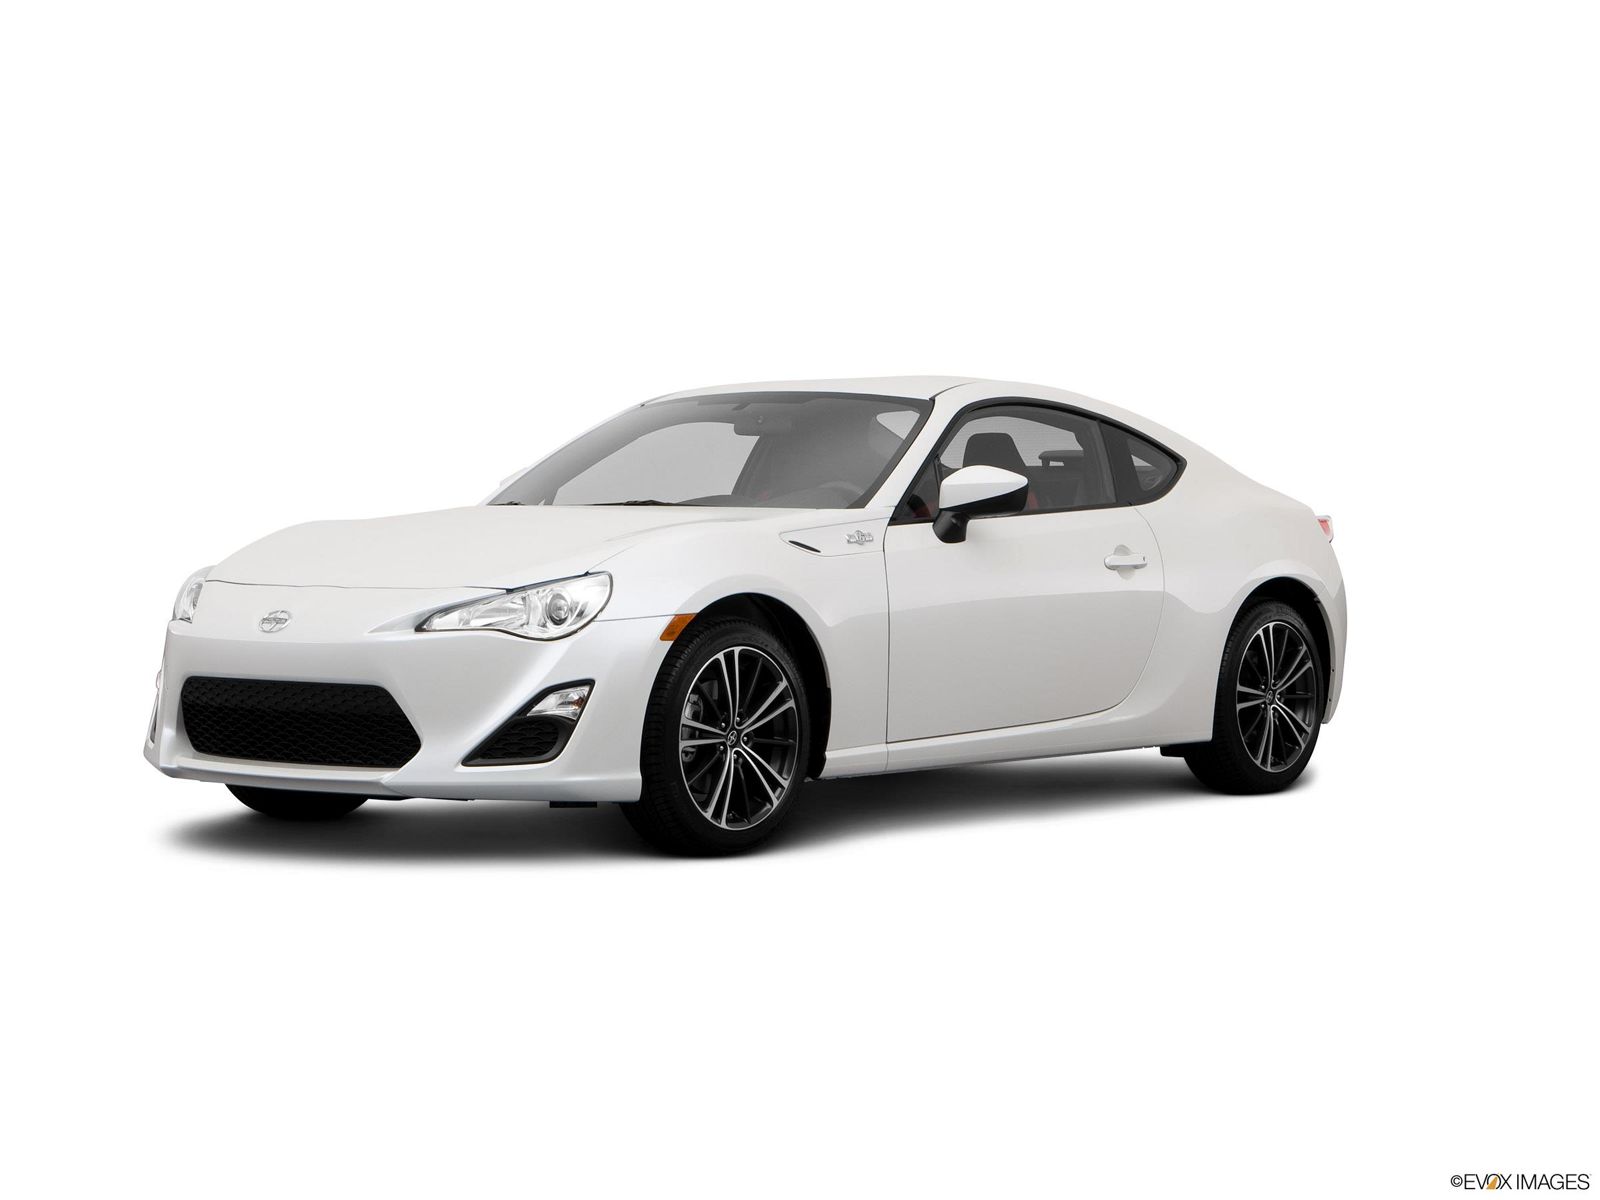 2013 Scion FR-S Research, Photos, Specs and Expertise | CarMax